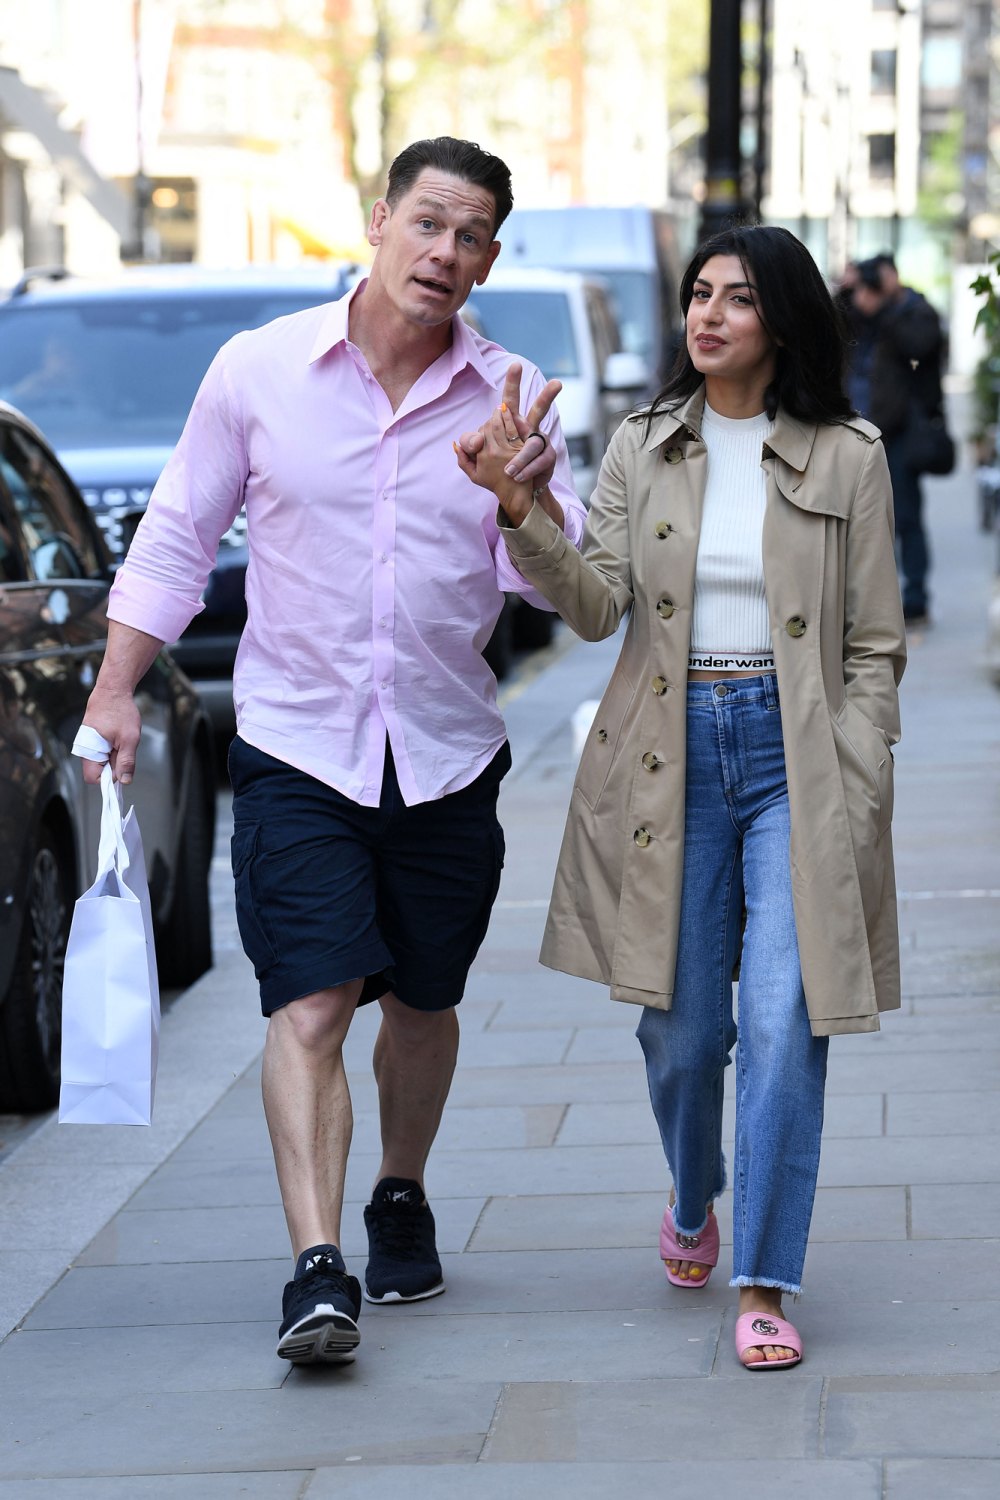 John Cena, Wife Shay Shariatzadeh Spotted on Rare Outing: Photo | Us Weekly